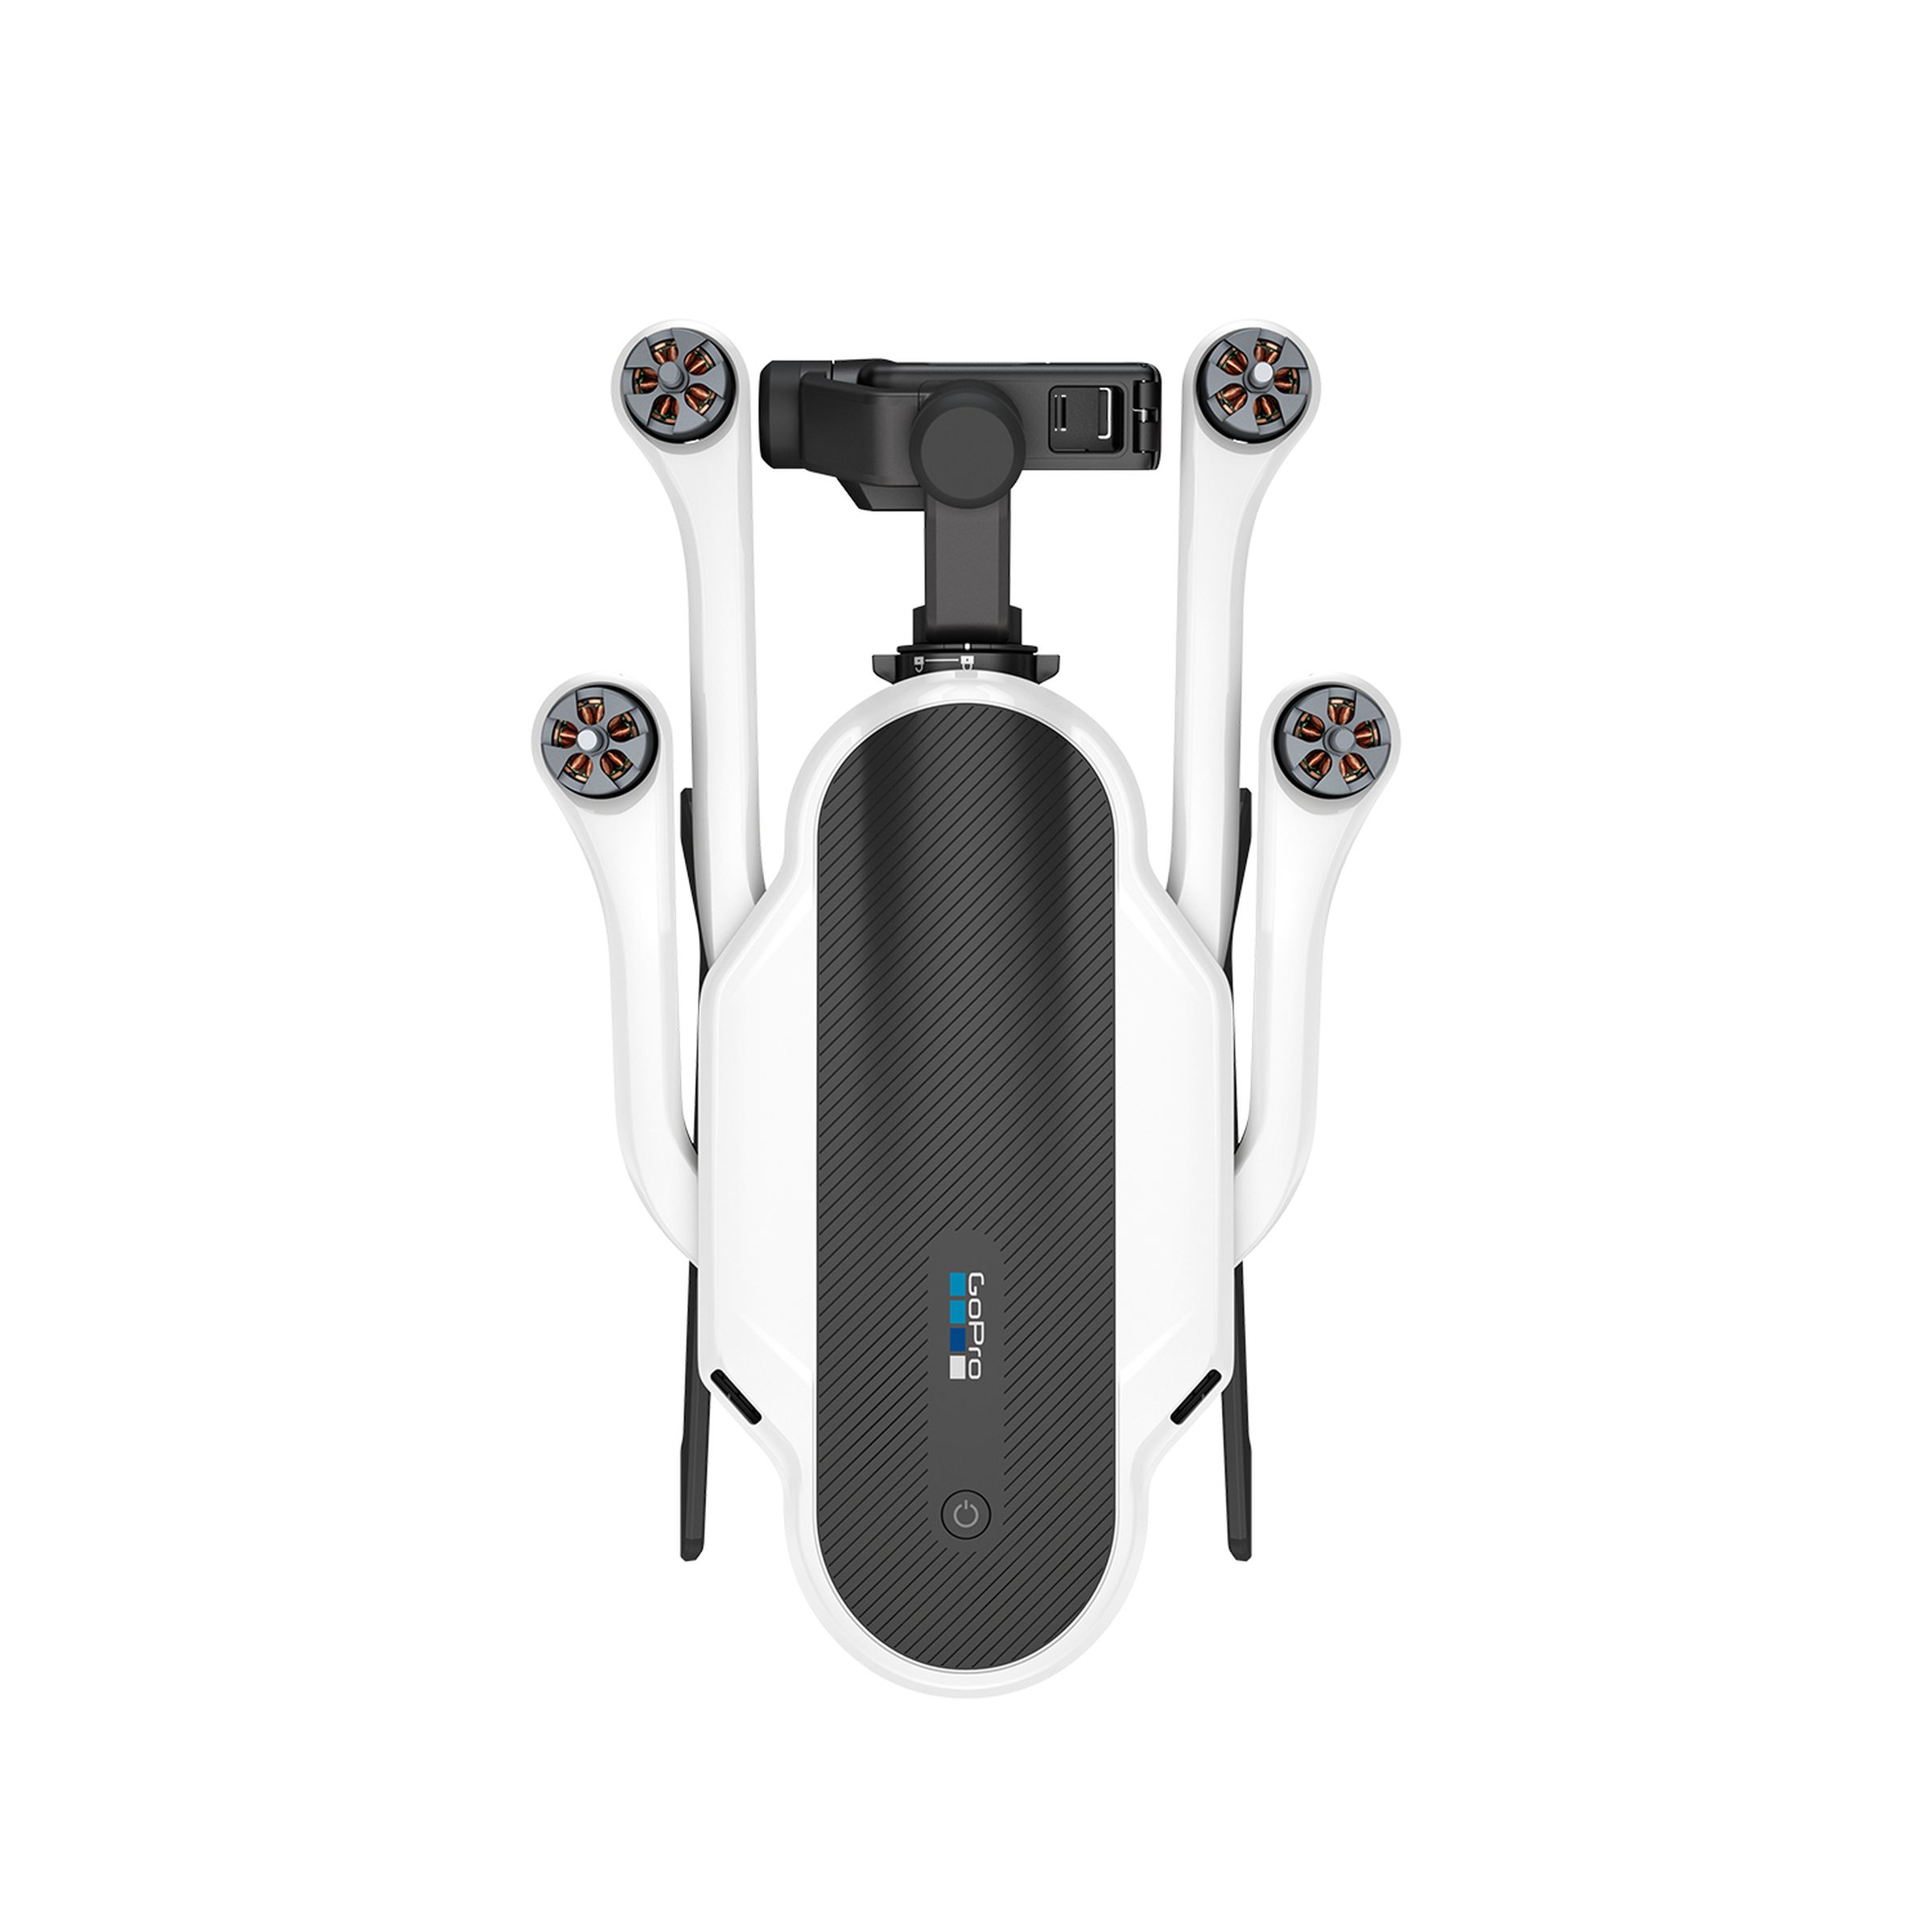 GoPro Karma drone and handheld stabilizer